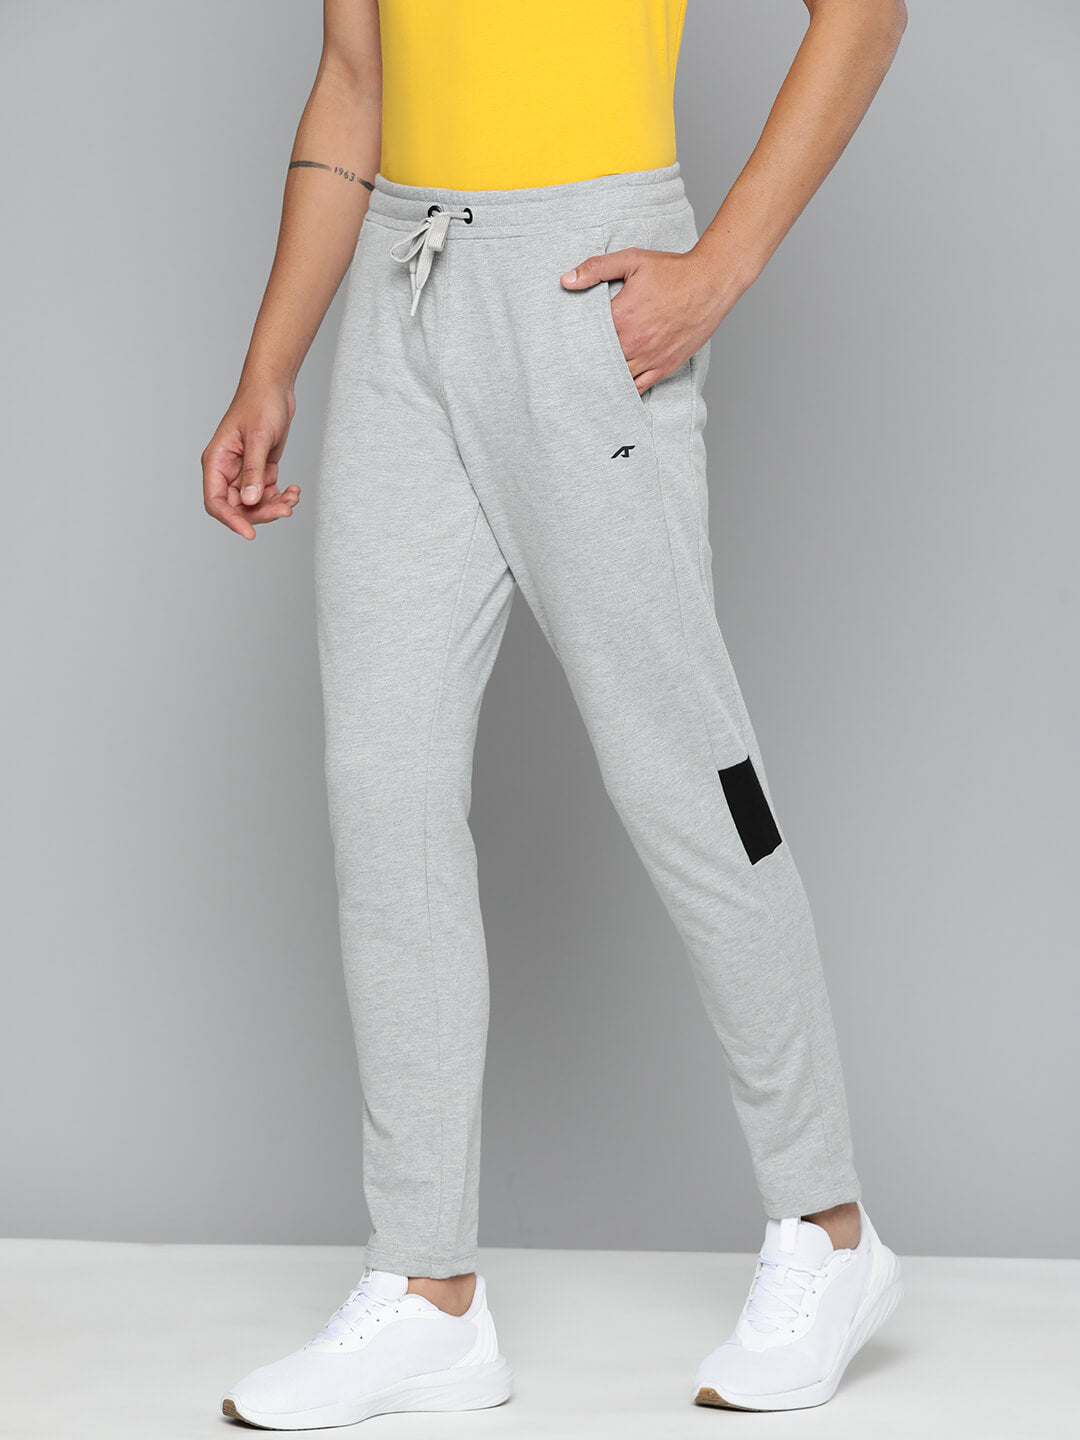 Givenchy Archetype slim-fit track pants price in Doha Qatar | Compare Prices